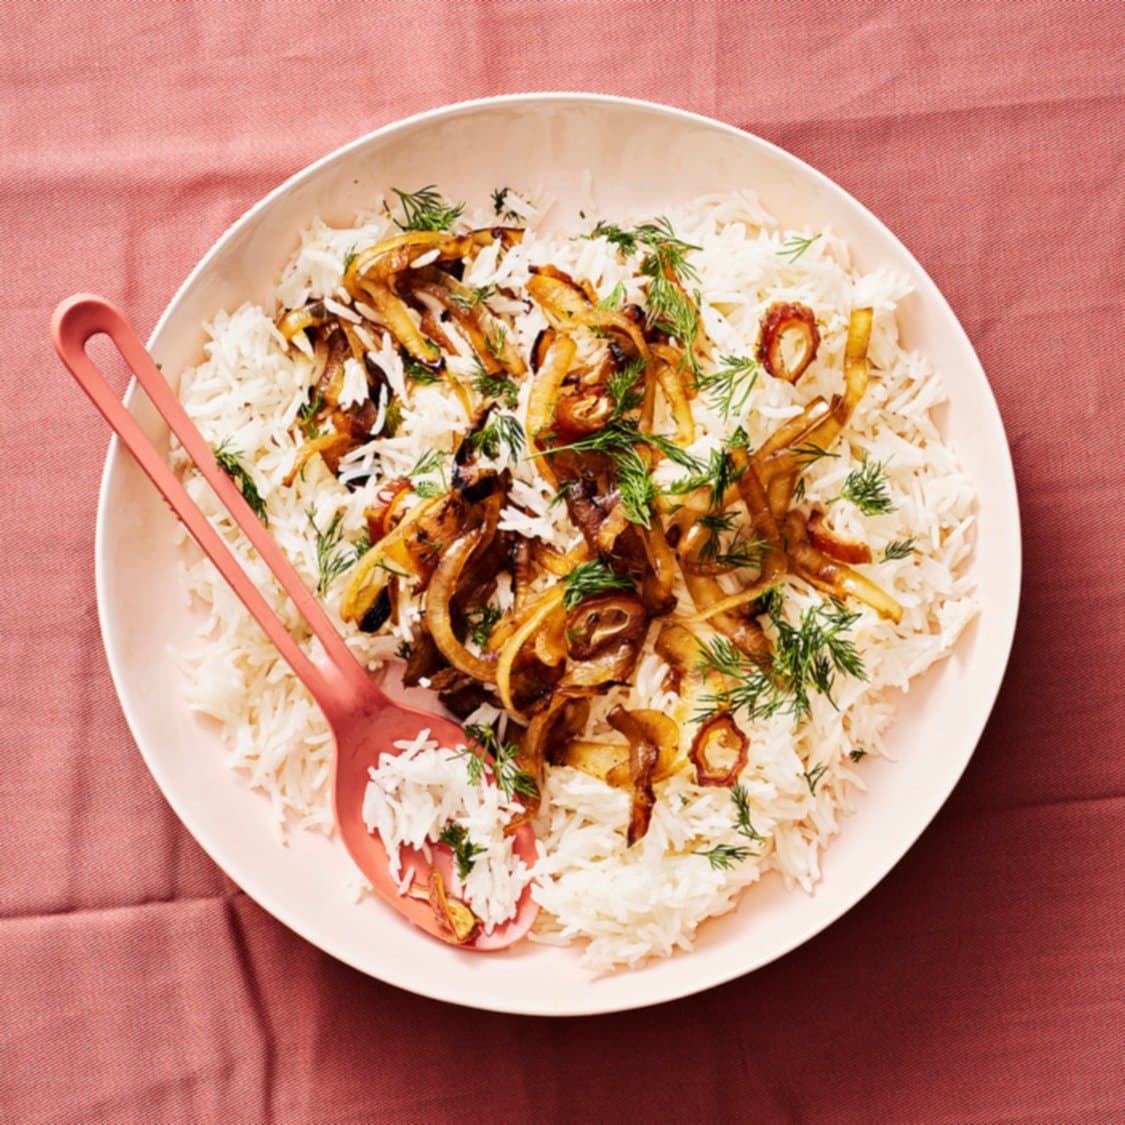 https://fleishigs.com/images/mobile-app/recipes/4143-list-toasted-basmati-rice-with-caramelized-onions-dates-and-dill.jpg